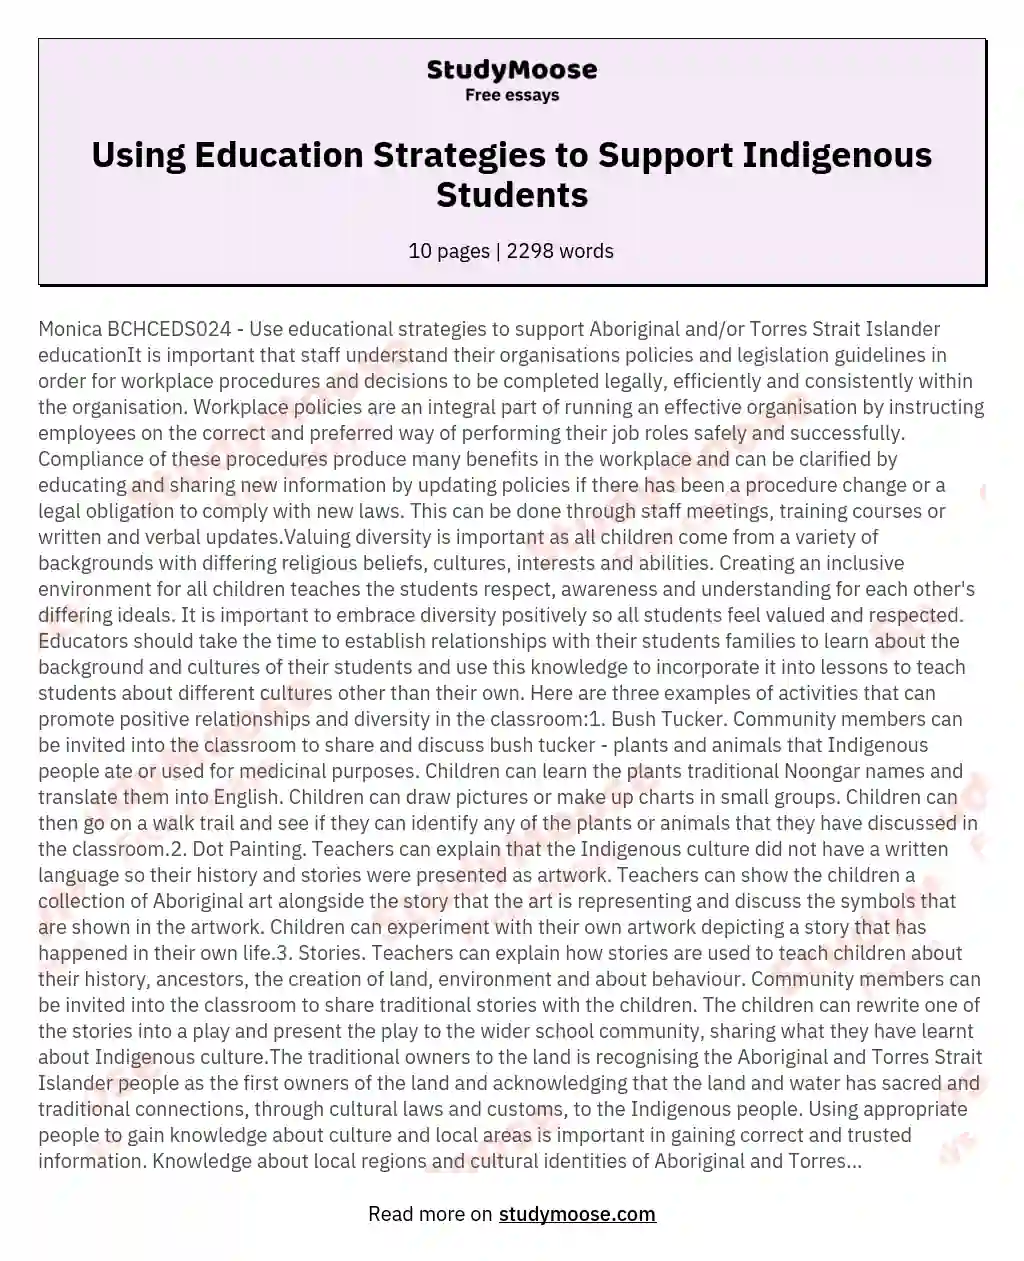 Using Education Strategies to Support Indigenous Students essay